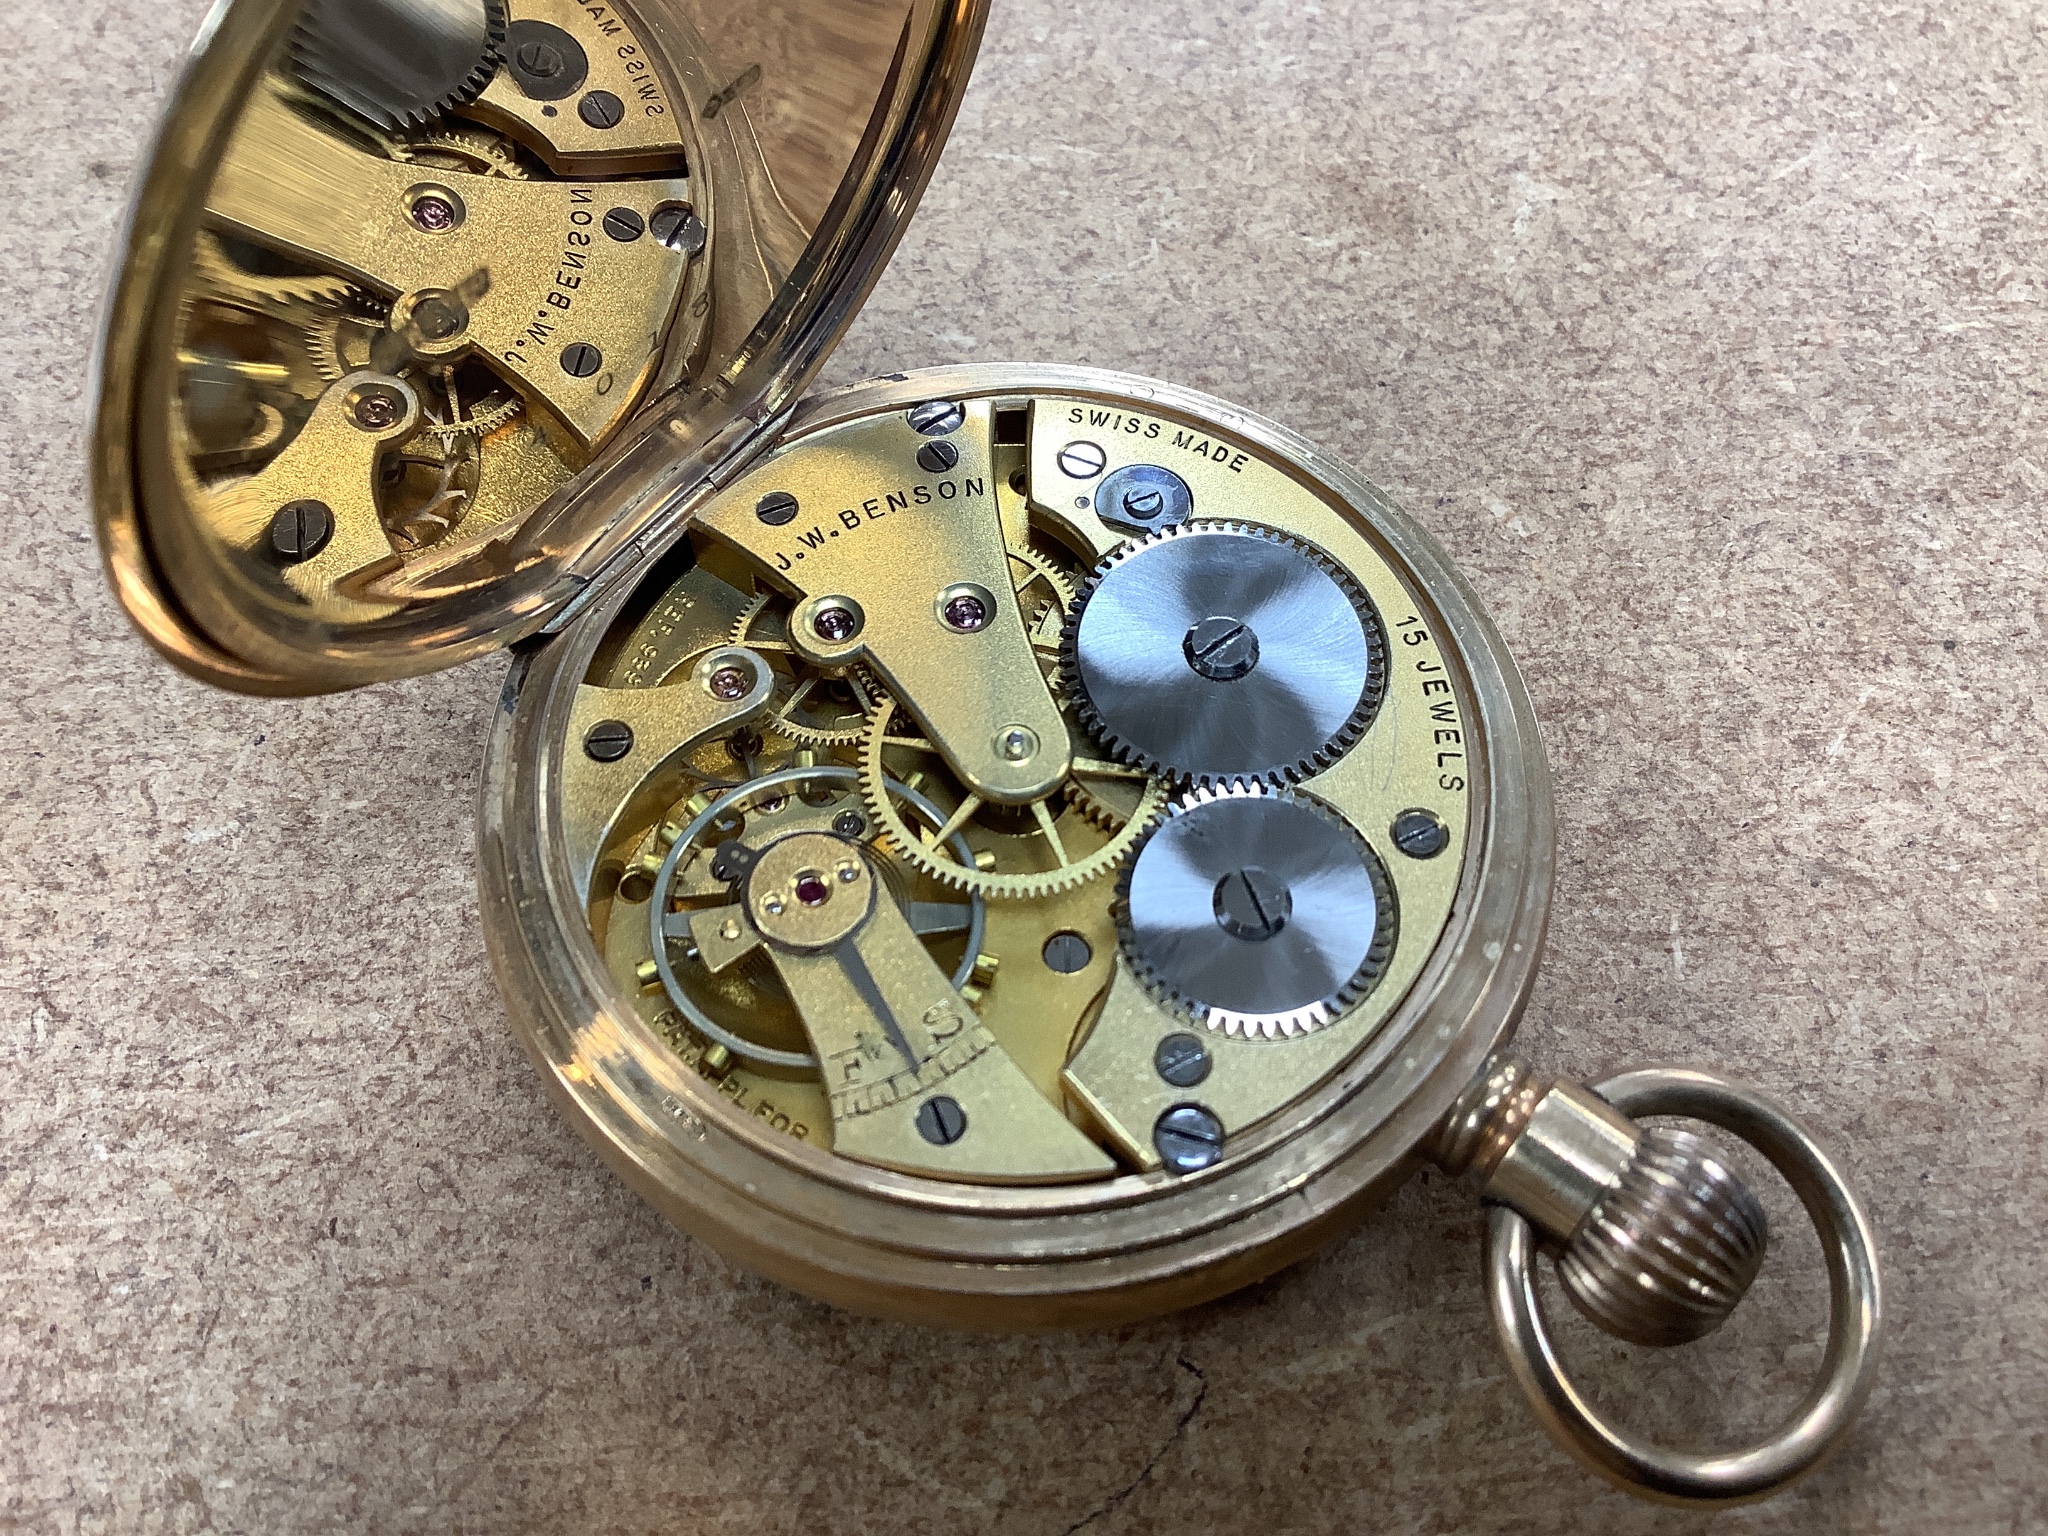 Seven assorted pocket watches including a 9ct gold open face J.W. Benson pocket watch, gross weight 83.3 grams, a silver open face pocket watch by H. Samuel, Manchester and five other gold plated or base metal pocket wat